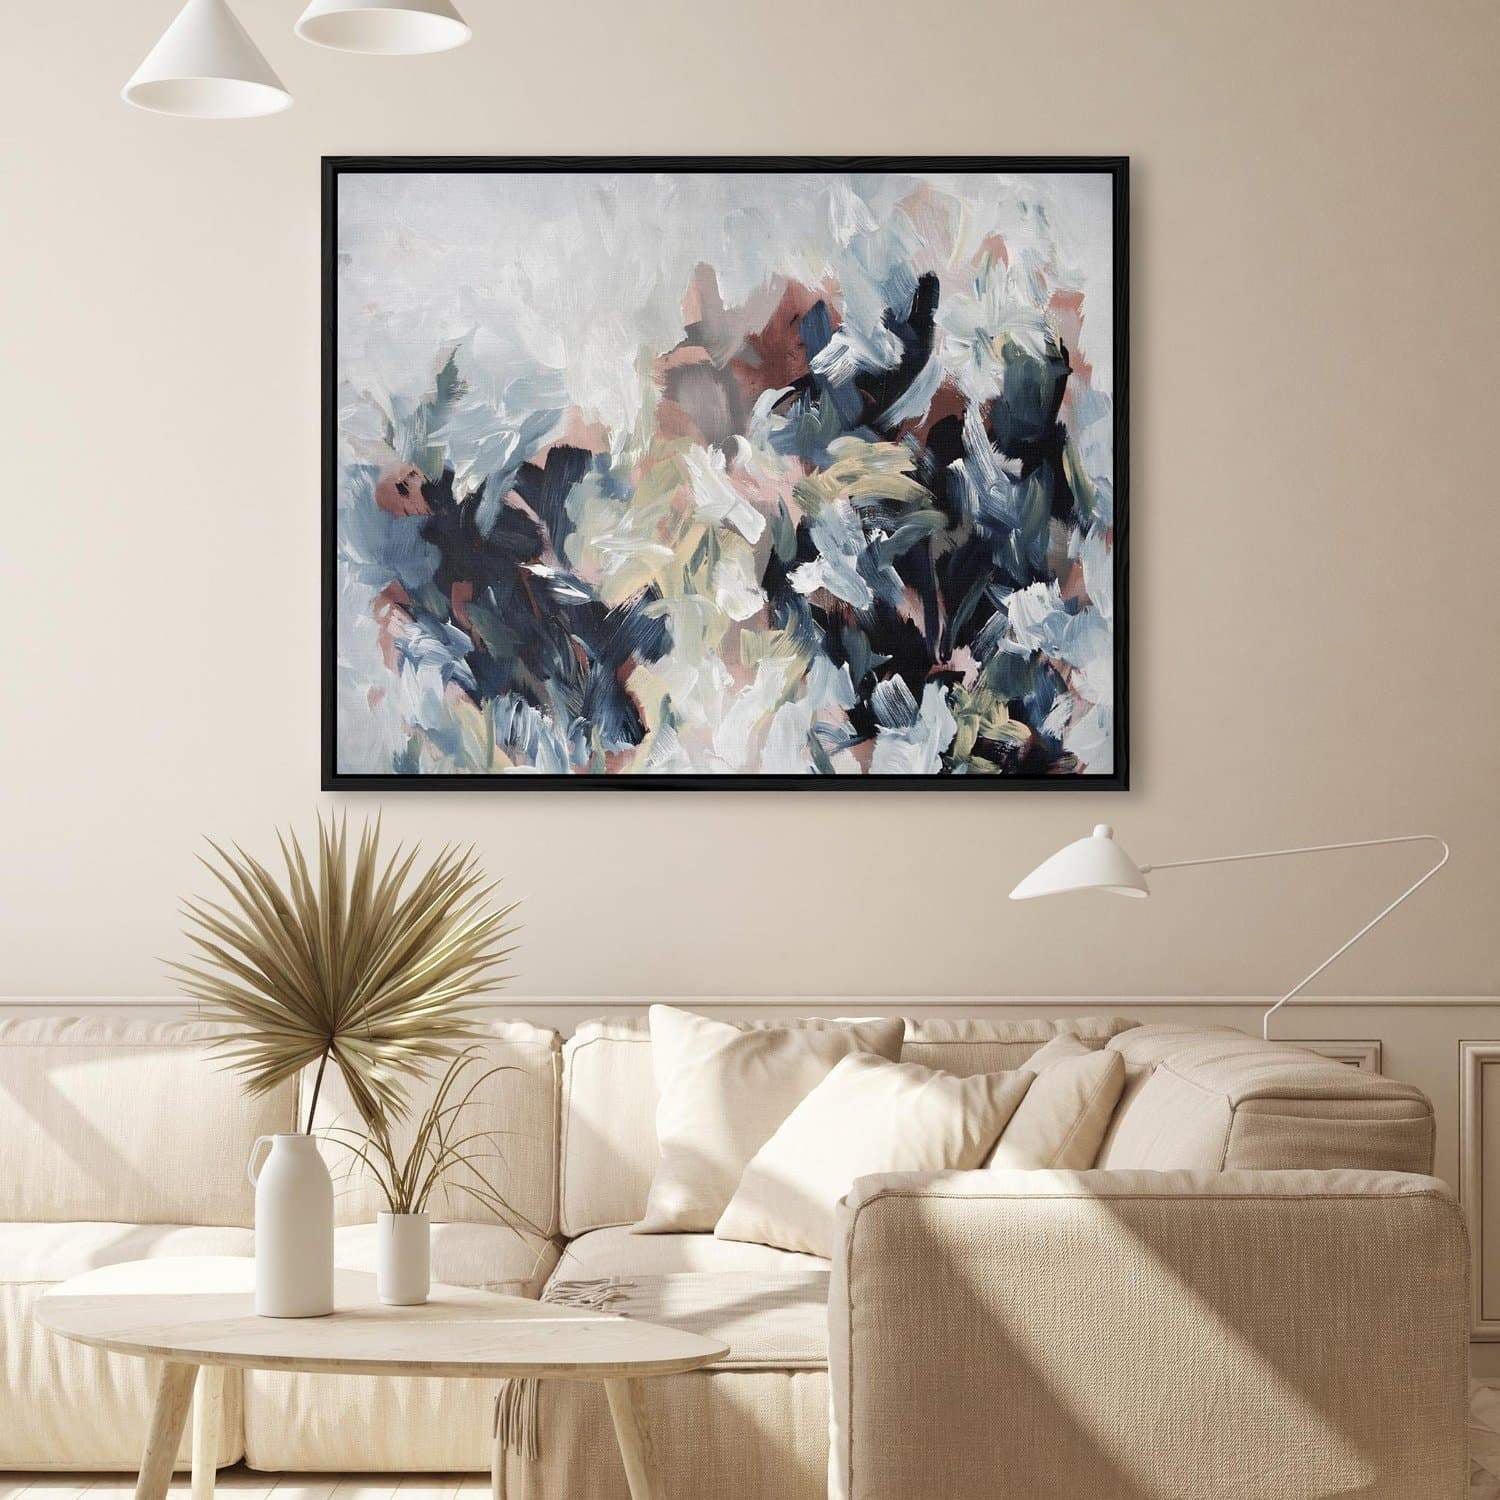 Abstract Art Ideas For Your Living Room